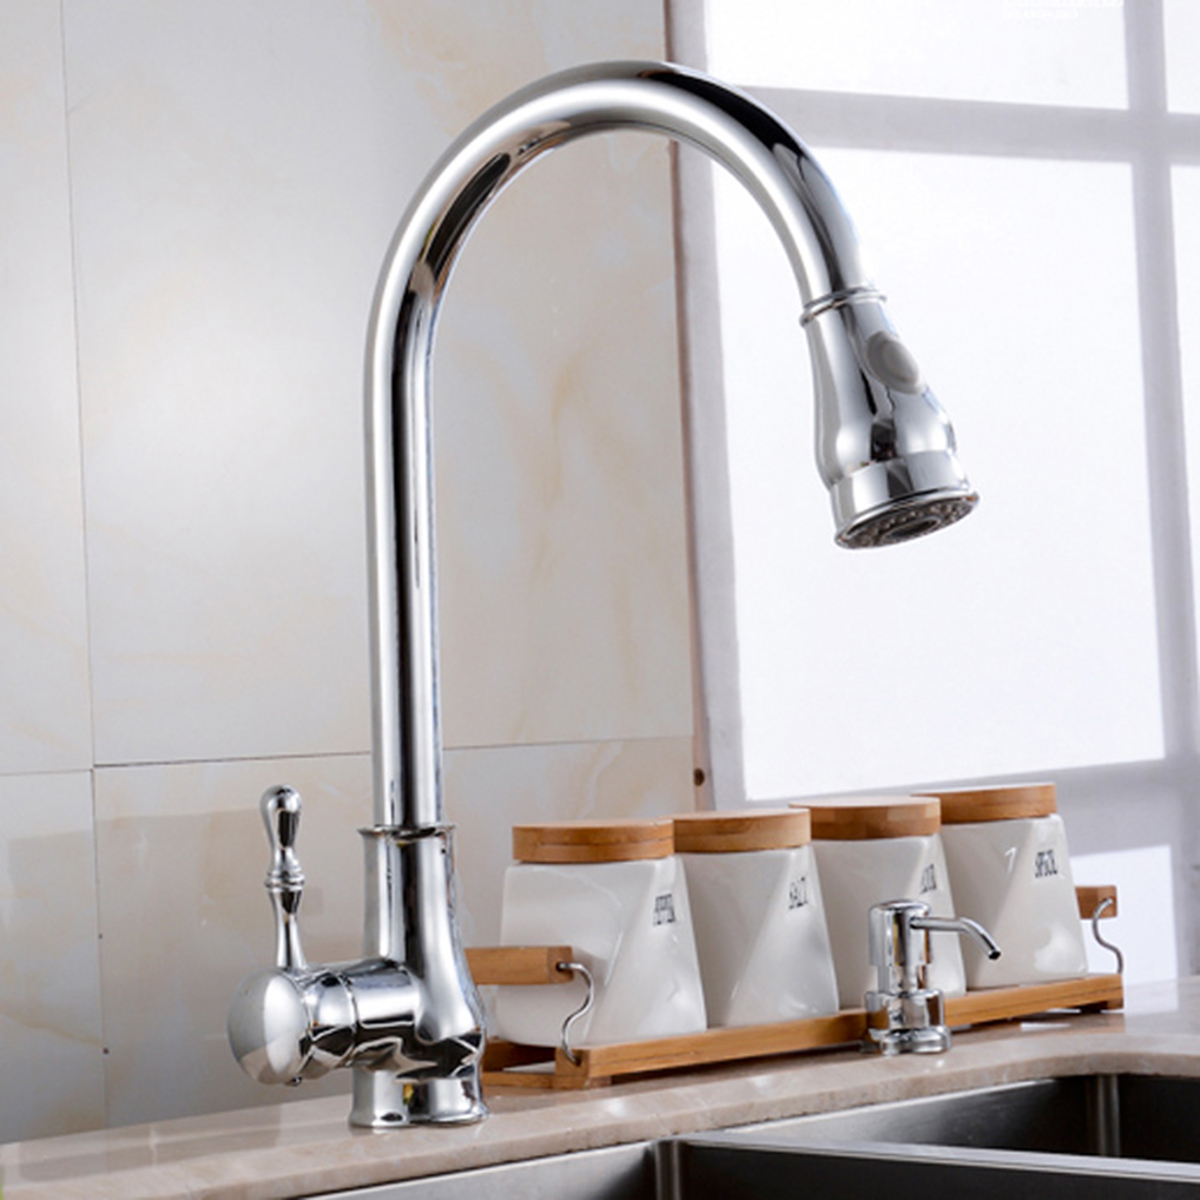 New Kitchen Sink Faucet Led Light Rotatable Spout Pull Out Down Spray Waterfall Nickel Brushed